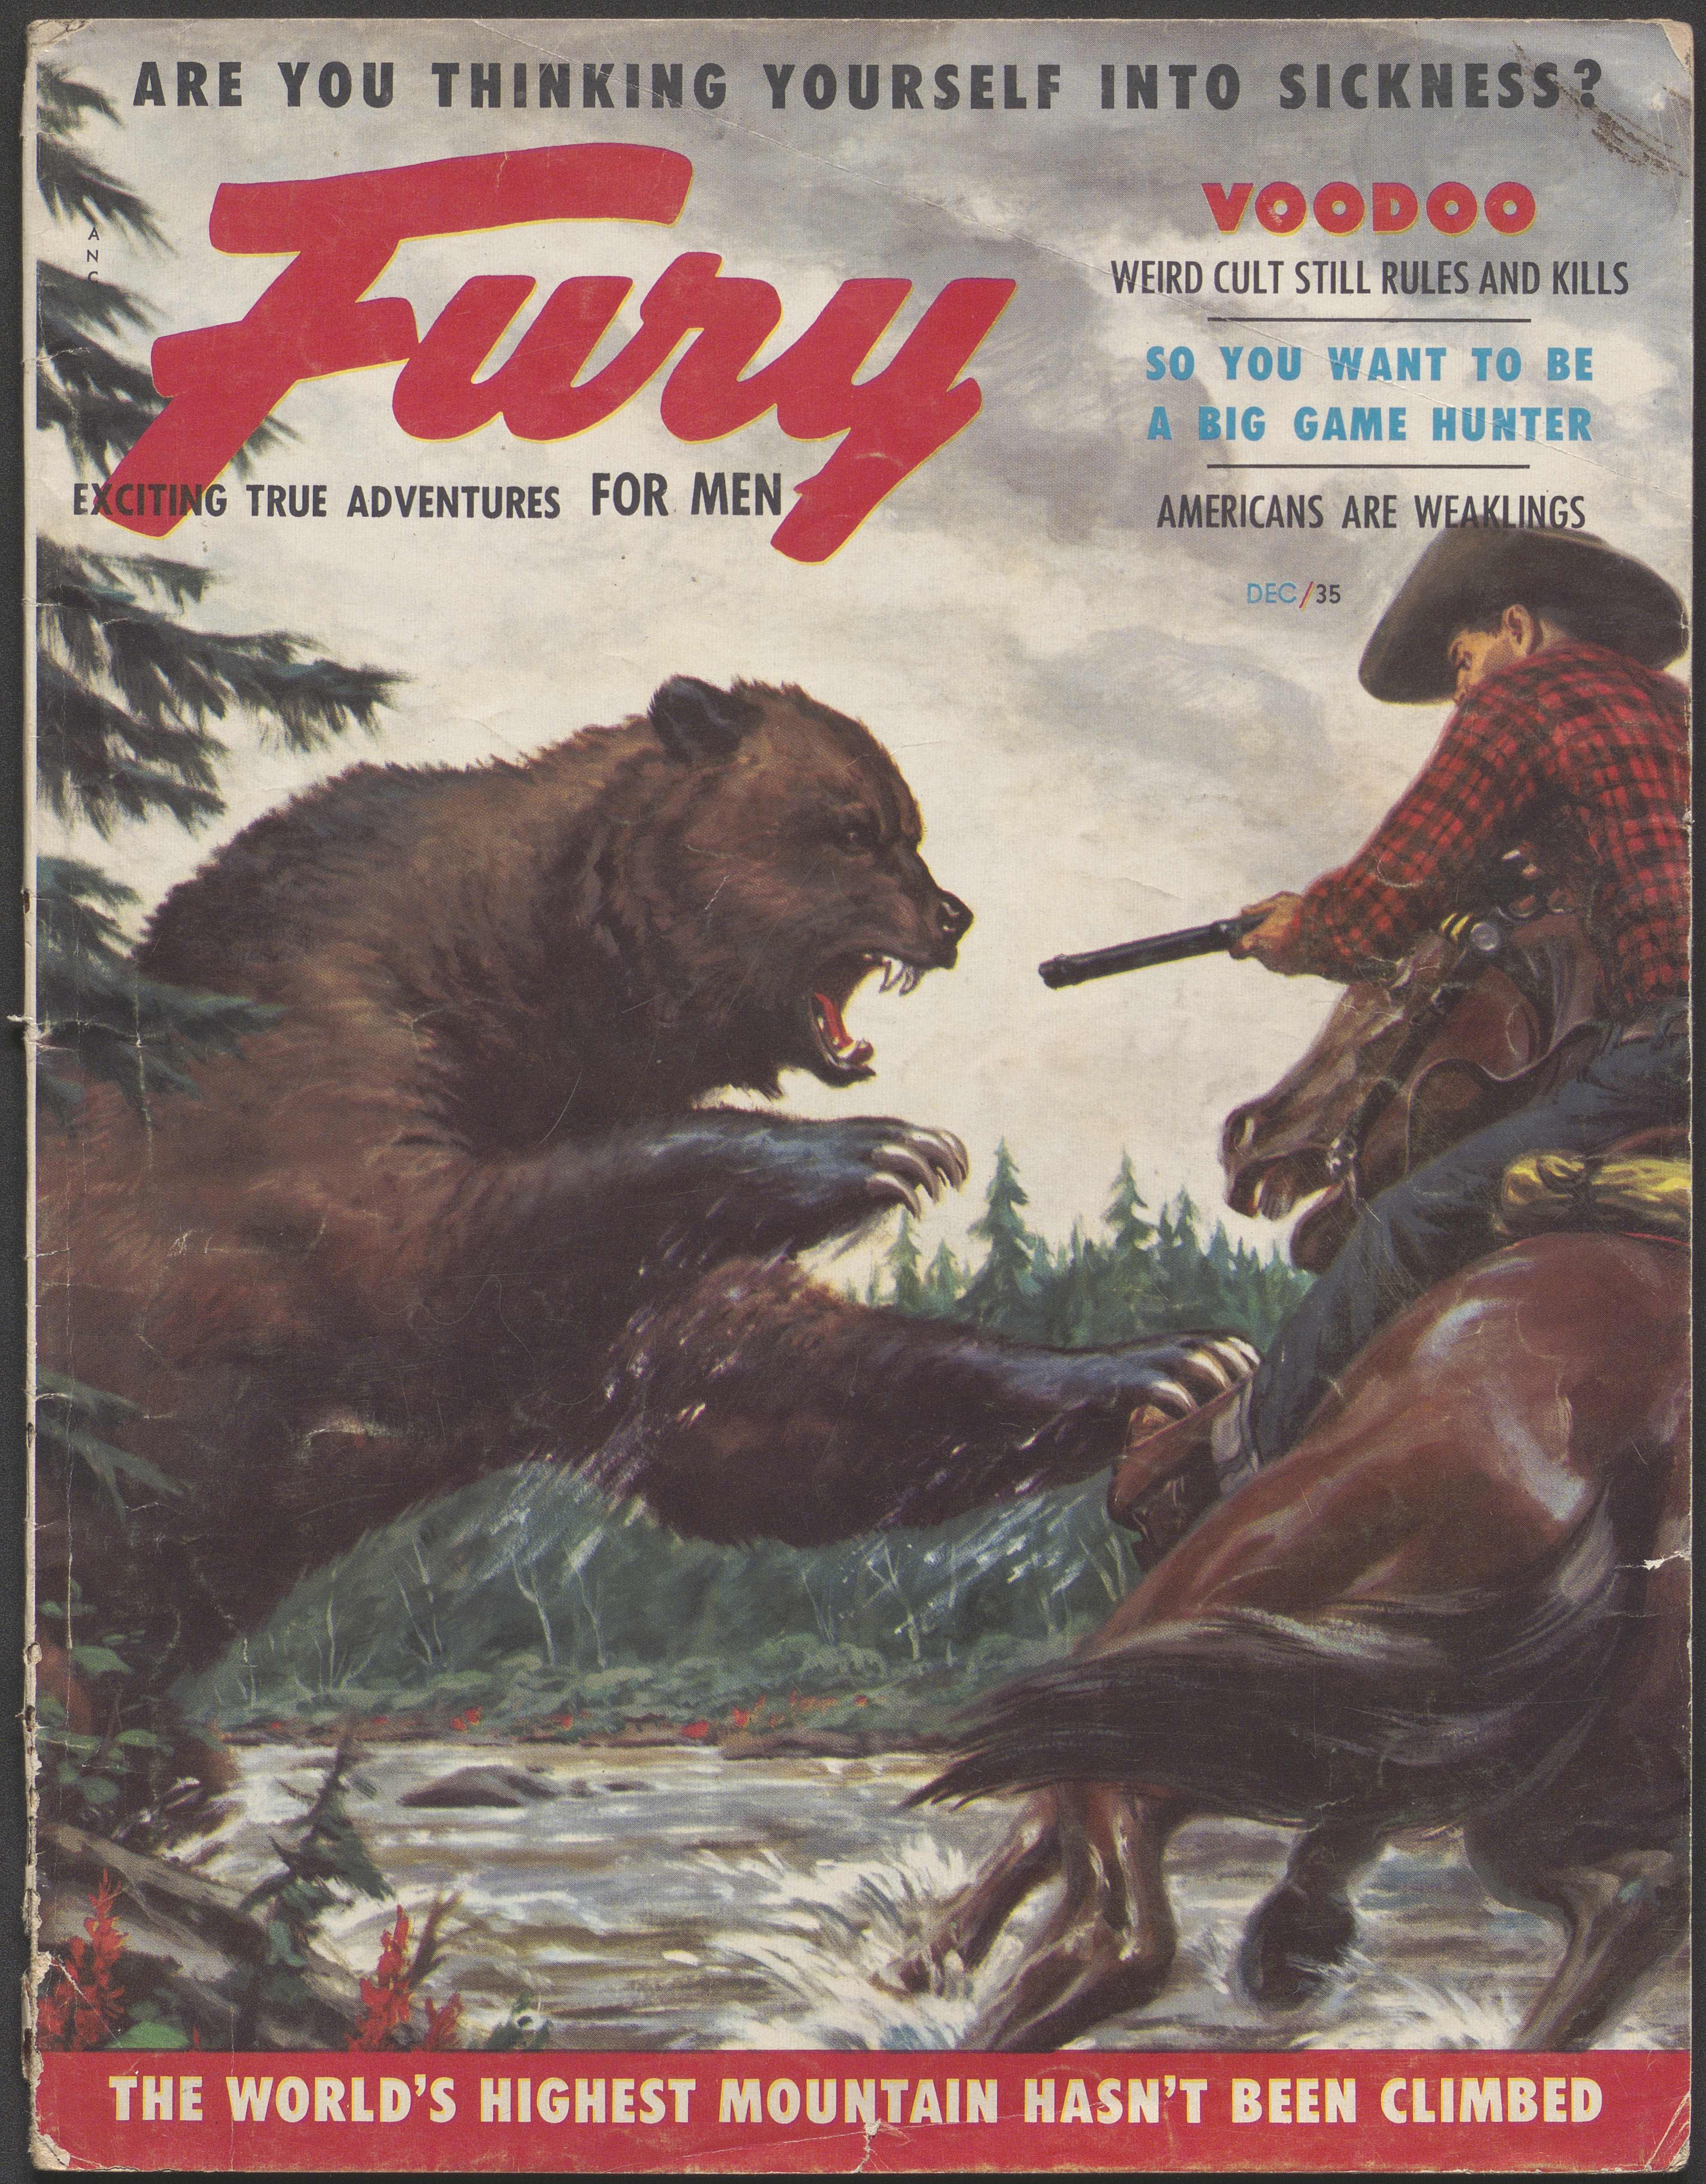 Magazine cover featuring a color illustration of a man on horseback shooting at an attacking bear